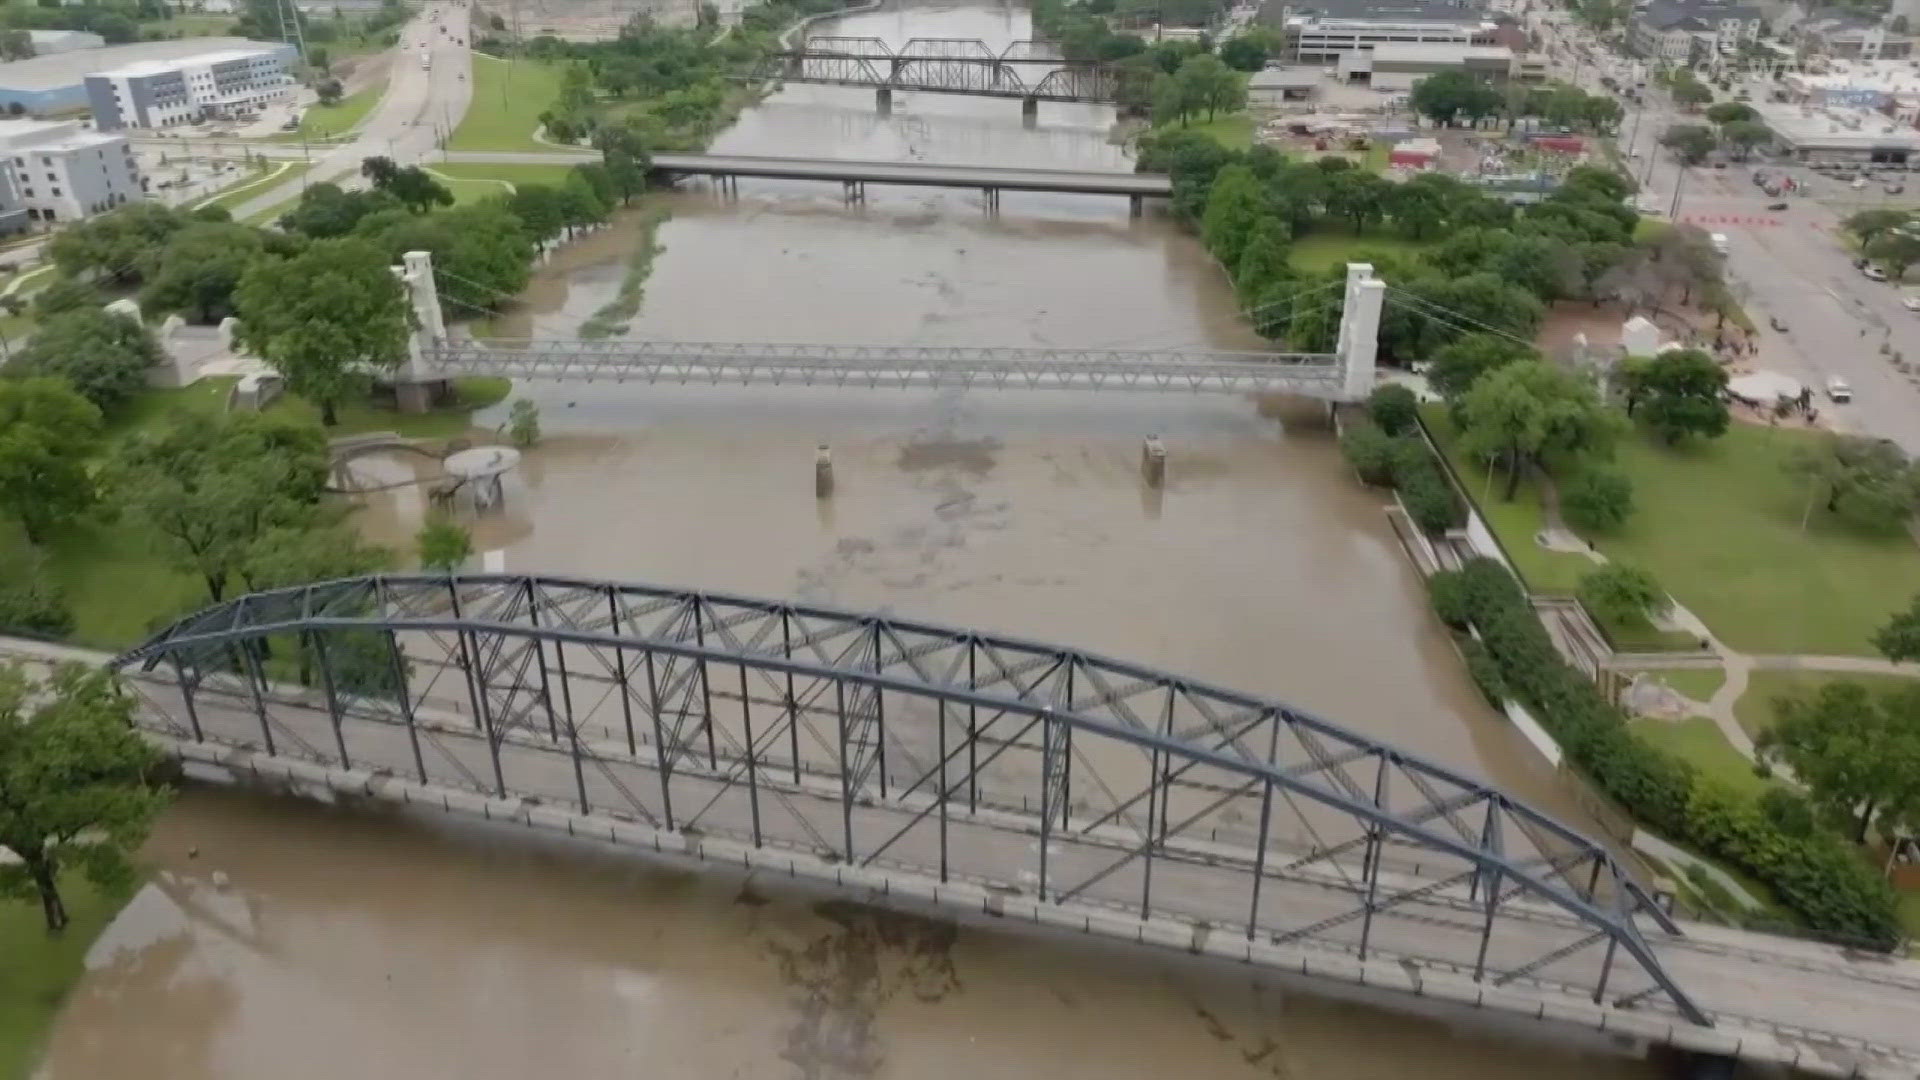 The Emergency Management Coordinator for the City of Waco and McLennan County said the river did enter the first flood stage, but data shows it's now lowering.